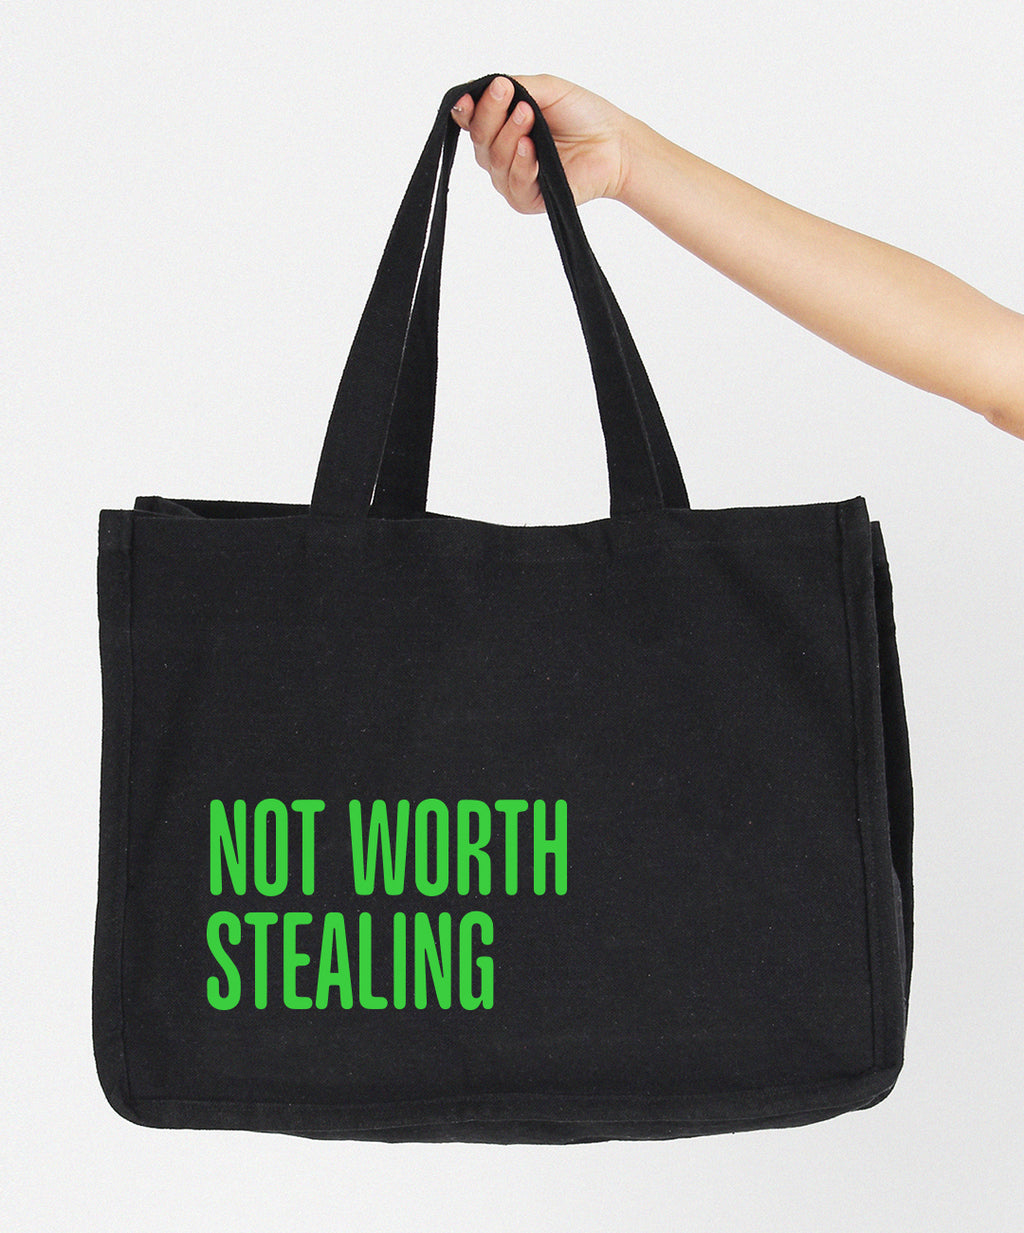 Not worth stealing tote